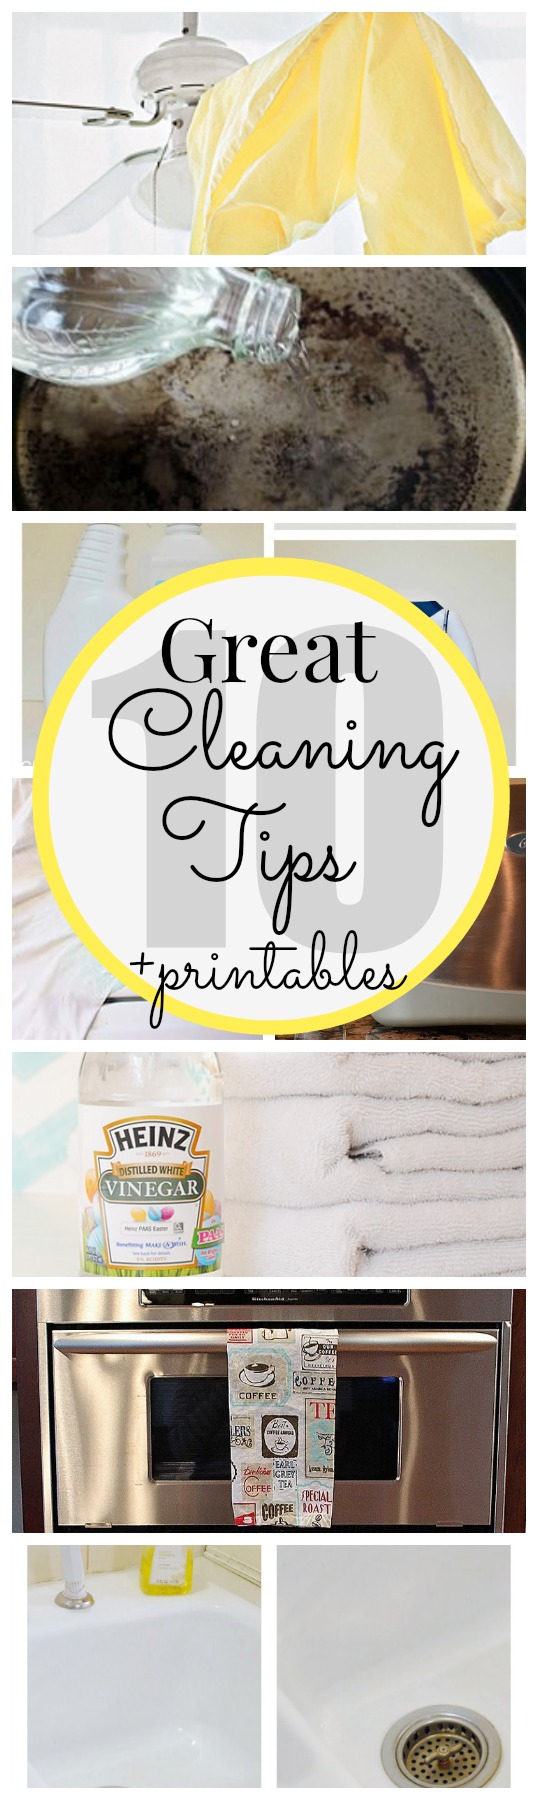 10 Cleaning tips 1